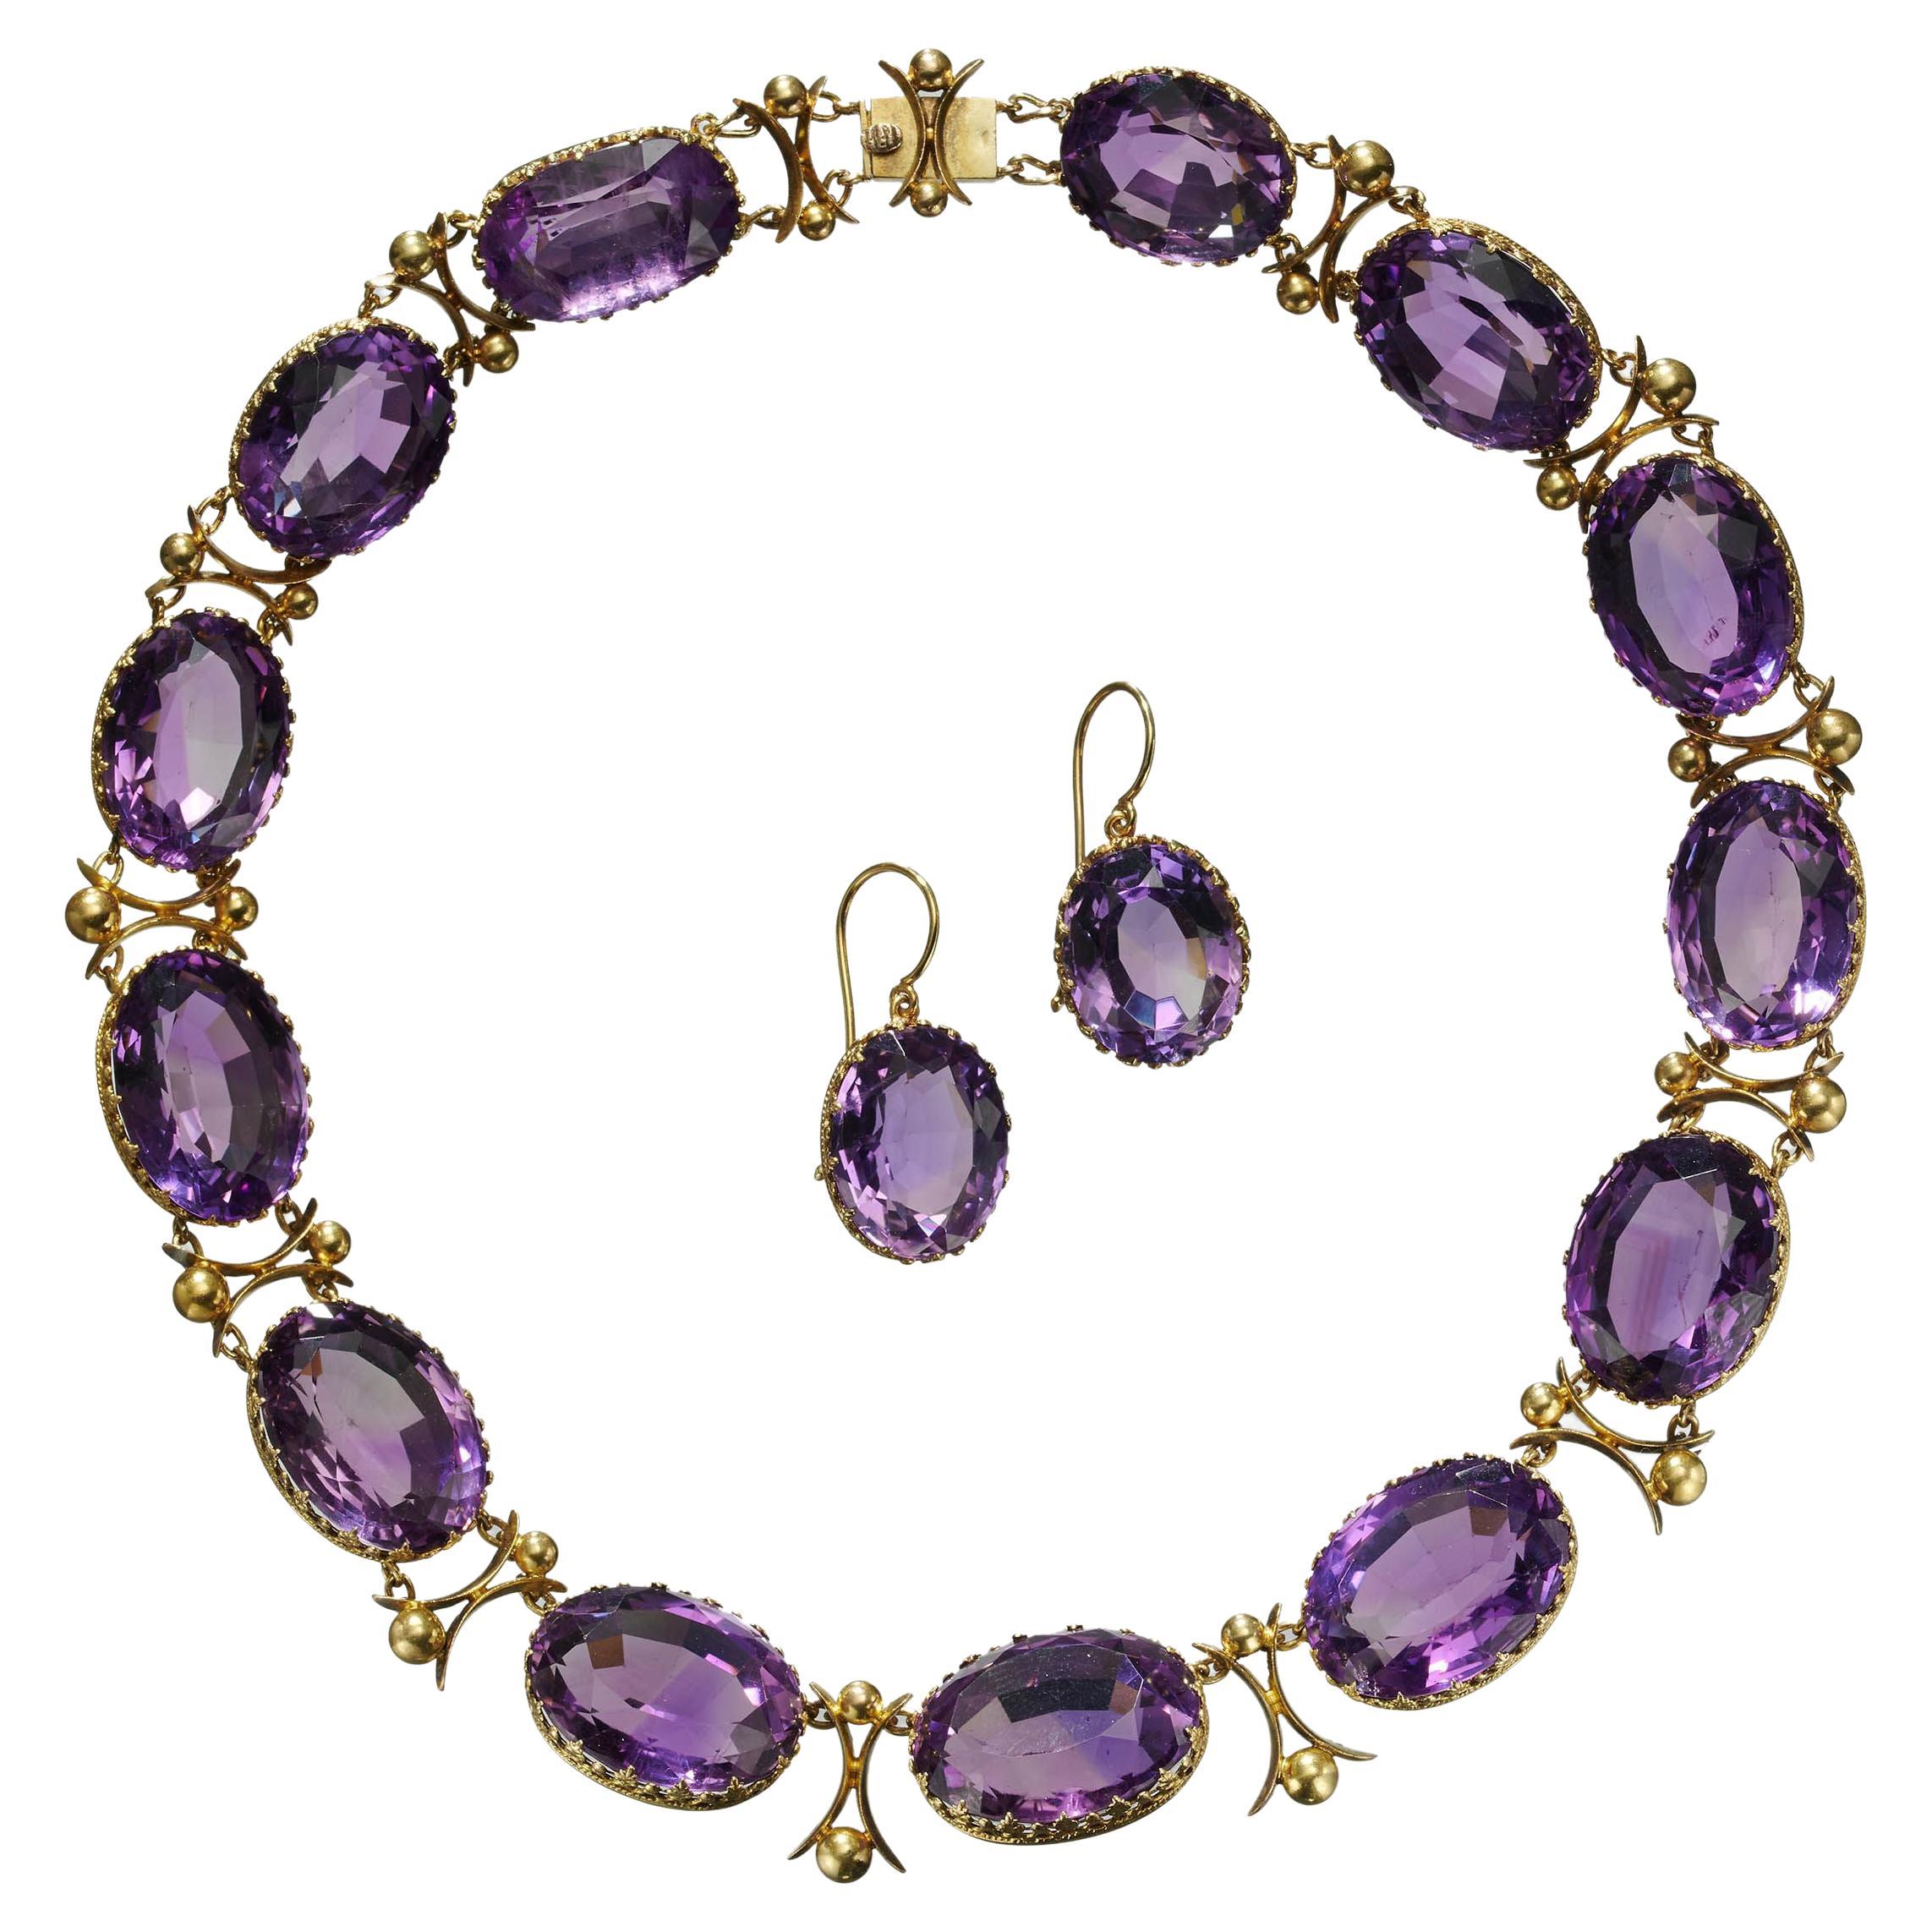 Antique Amethyst and Gold Riviére Necklace and Earrings Suite, Circa 1880